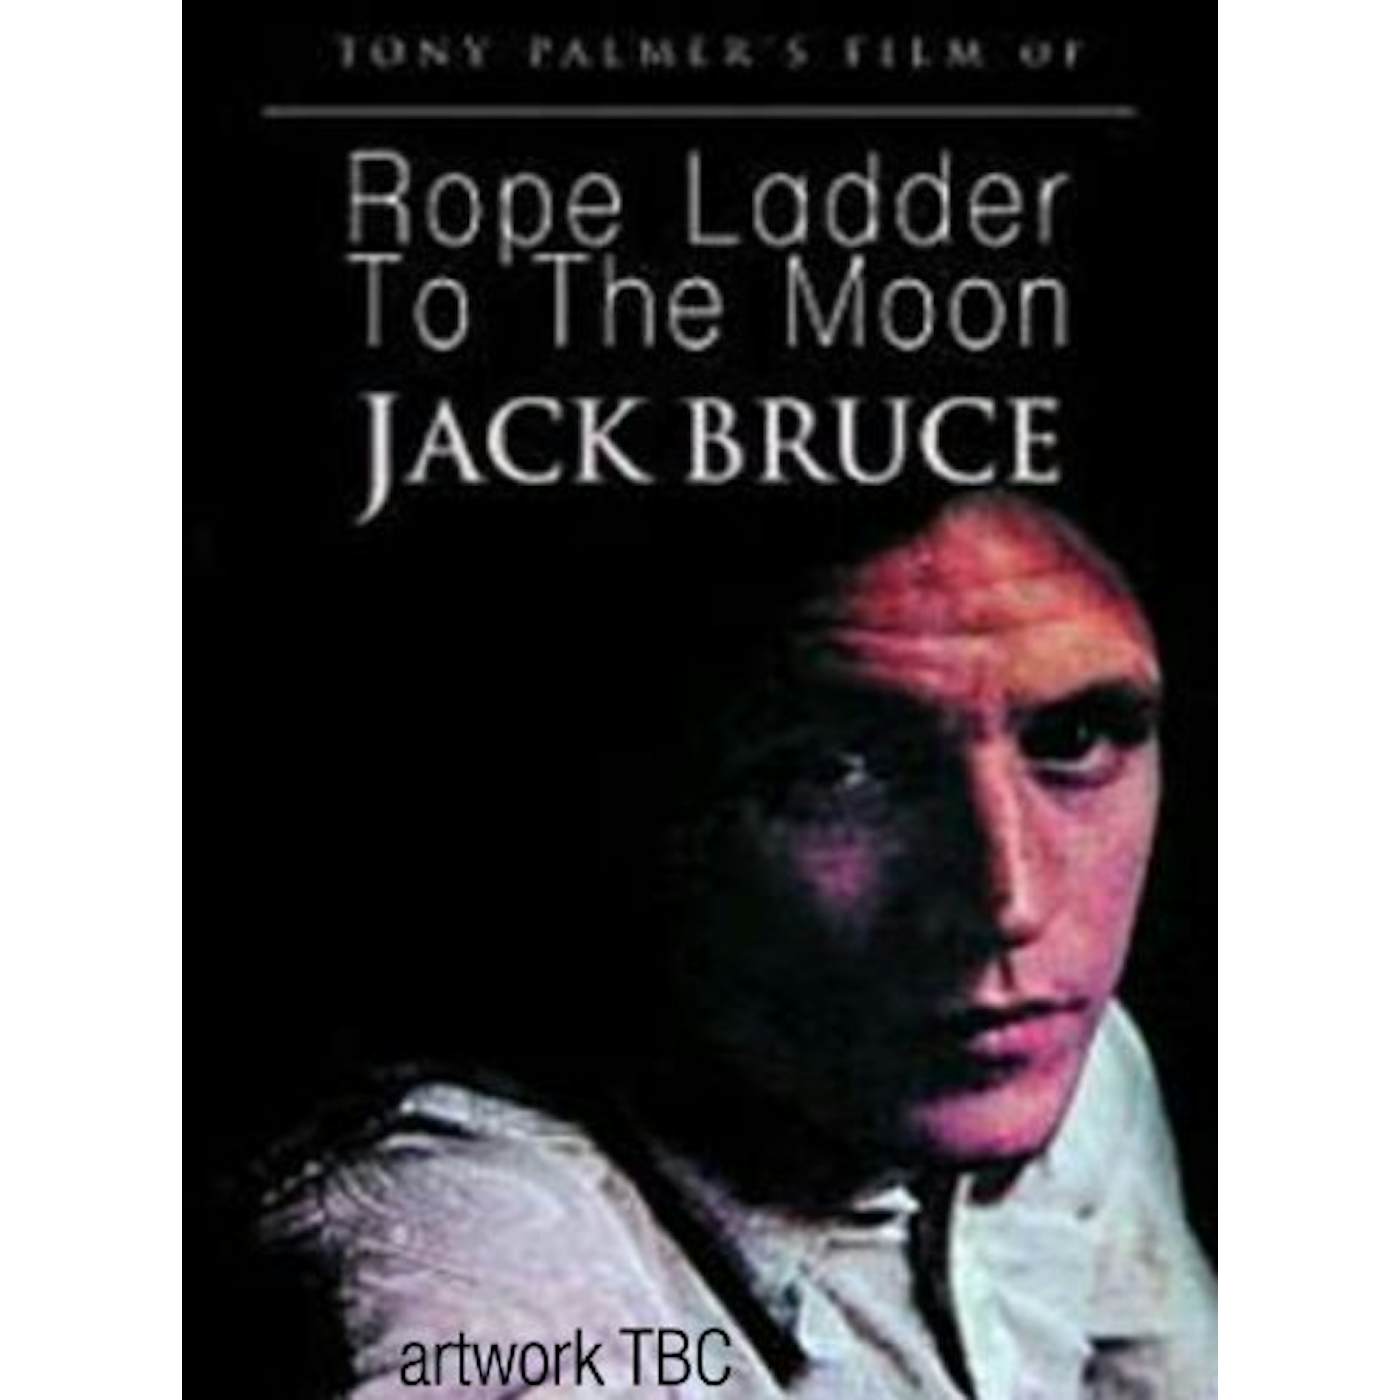 Jack Bruce ROPE LADDER TO THE MOON DVD